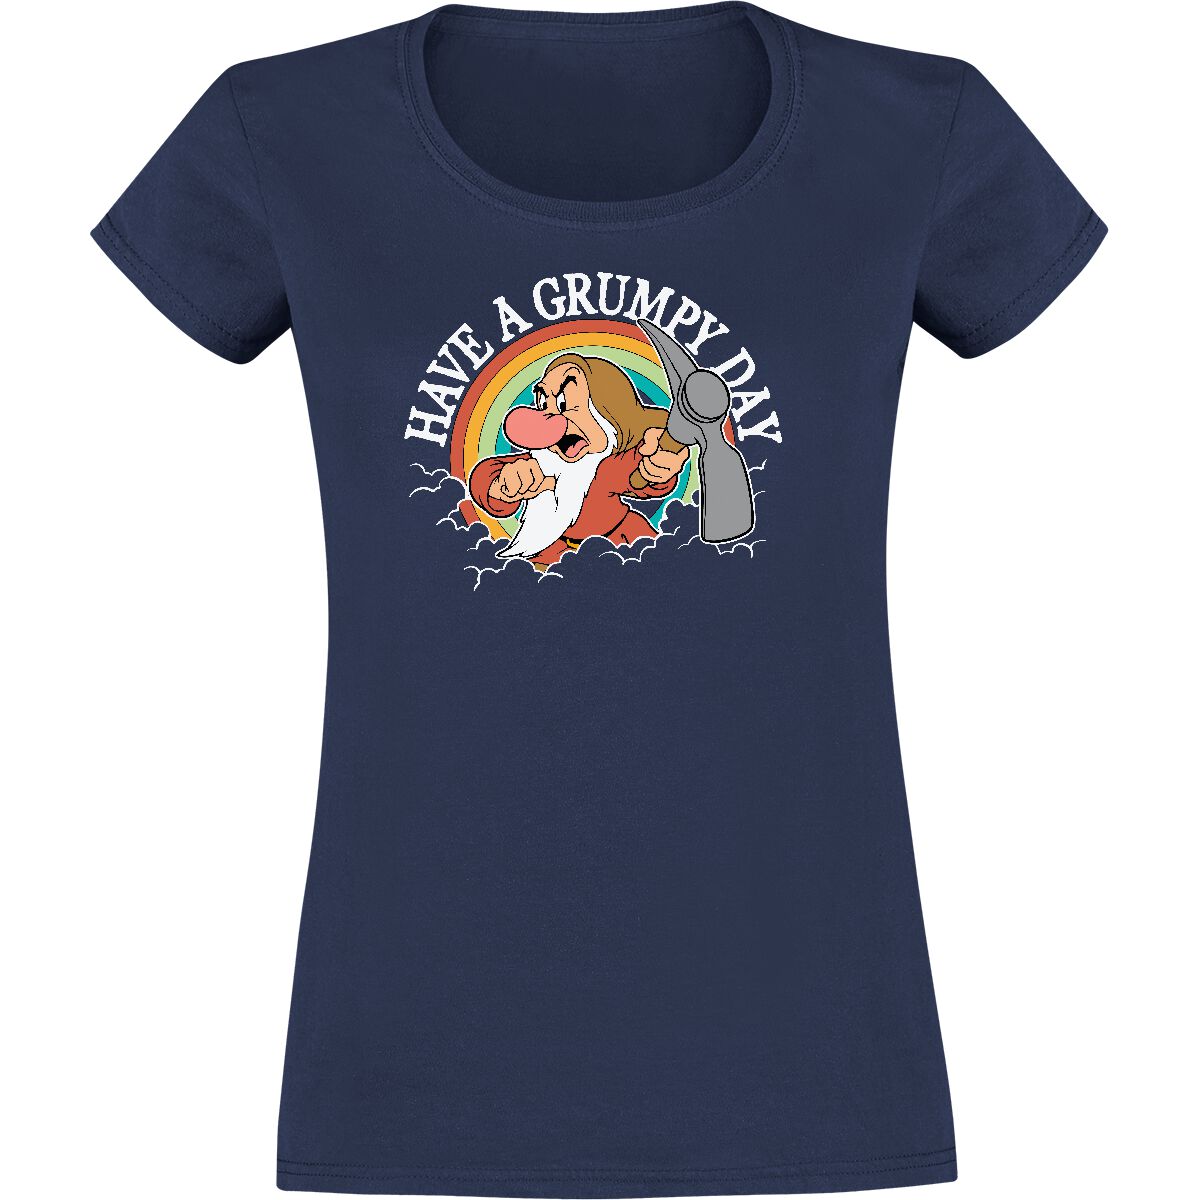 Snow White and the Seven Dwarfs Grumpy Day T-Shirt blue